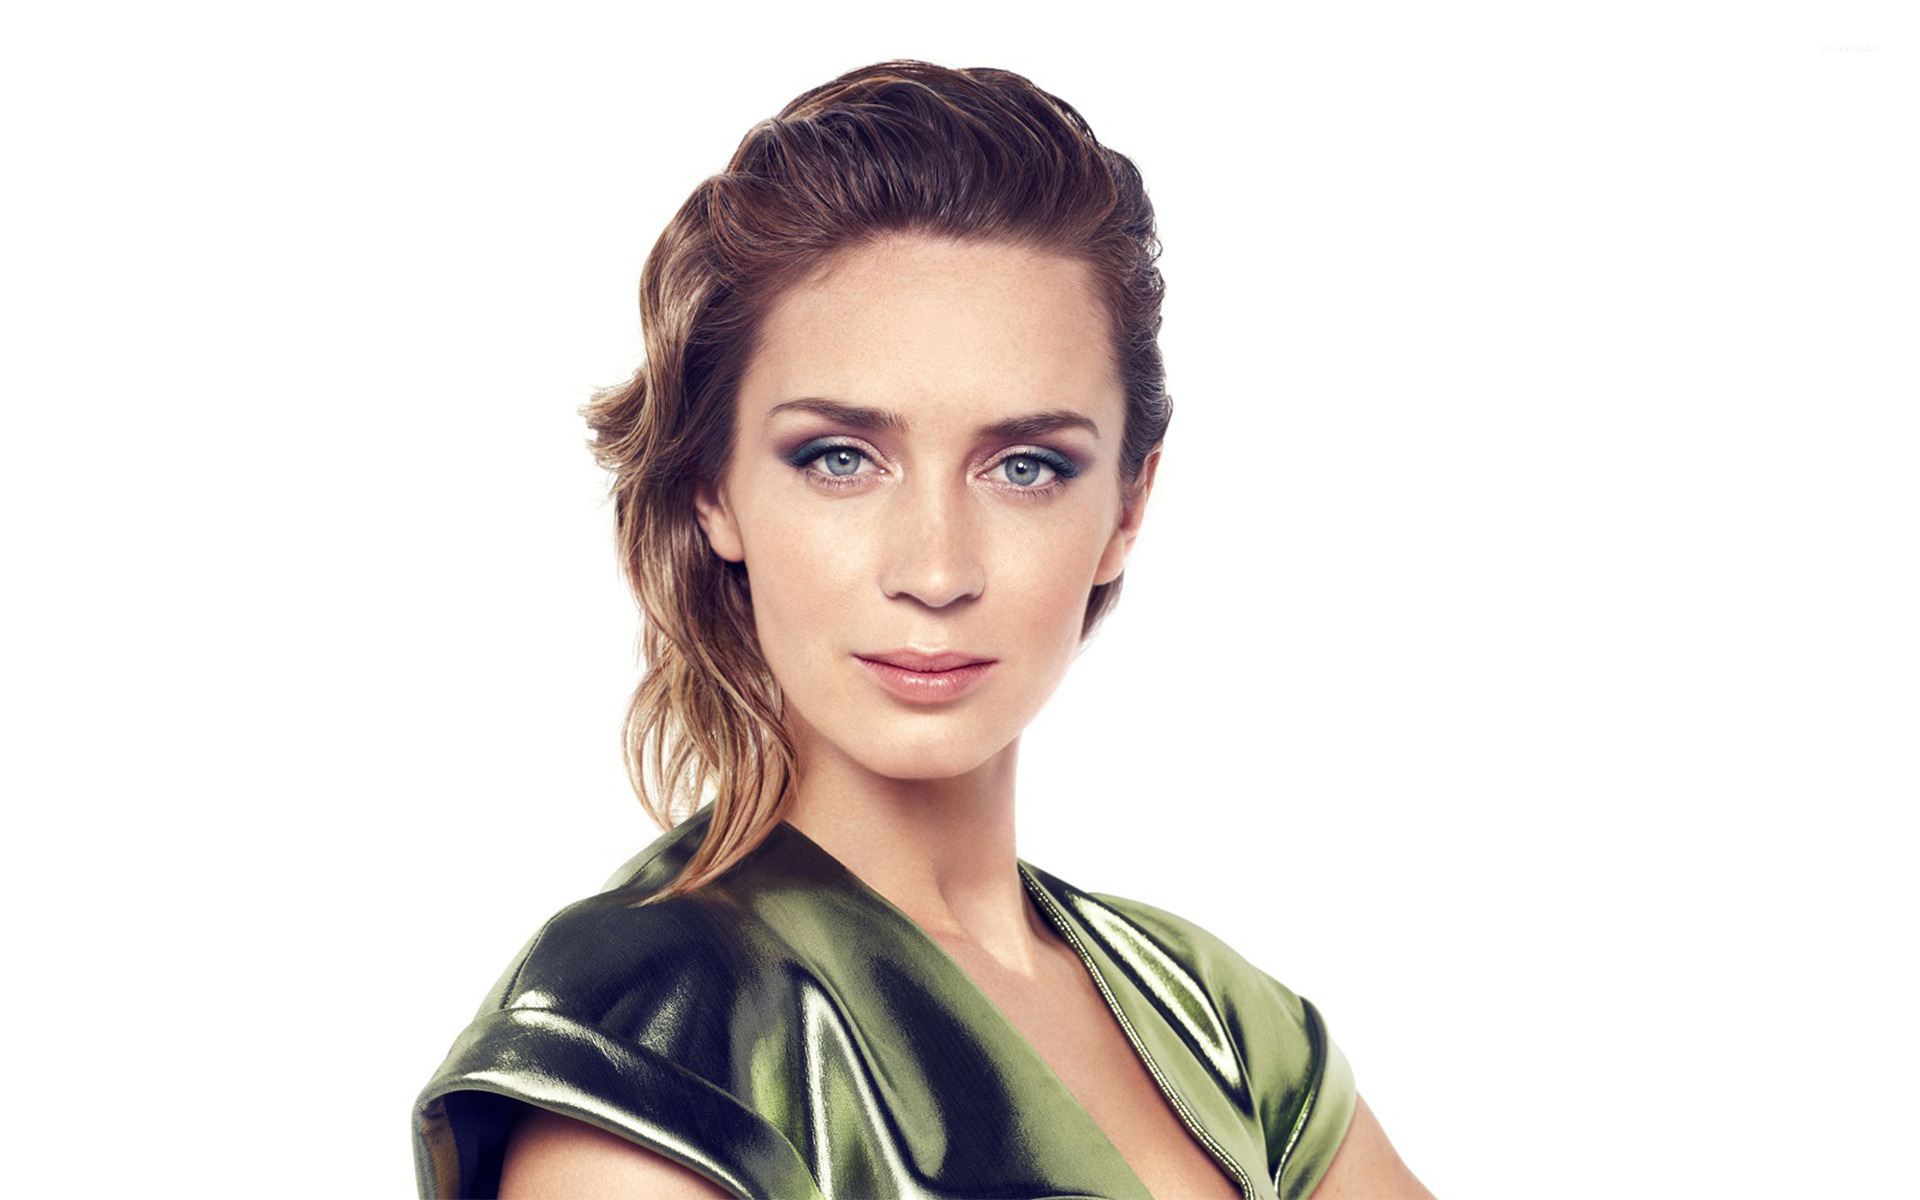 Edge of Tomorrow: Emily Blunt, Celebrity, Made her acting debut in a 2001 stage production of The Royal Family. 1920x1200 HD Background.